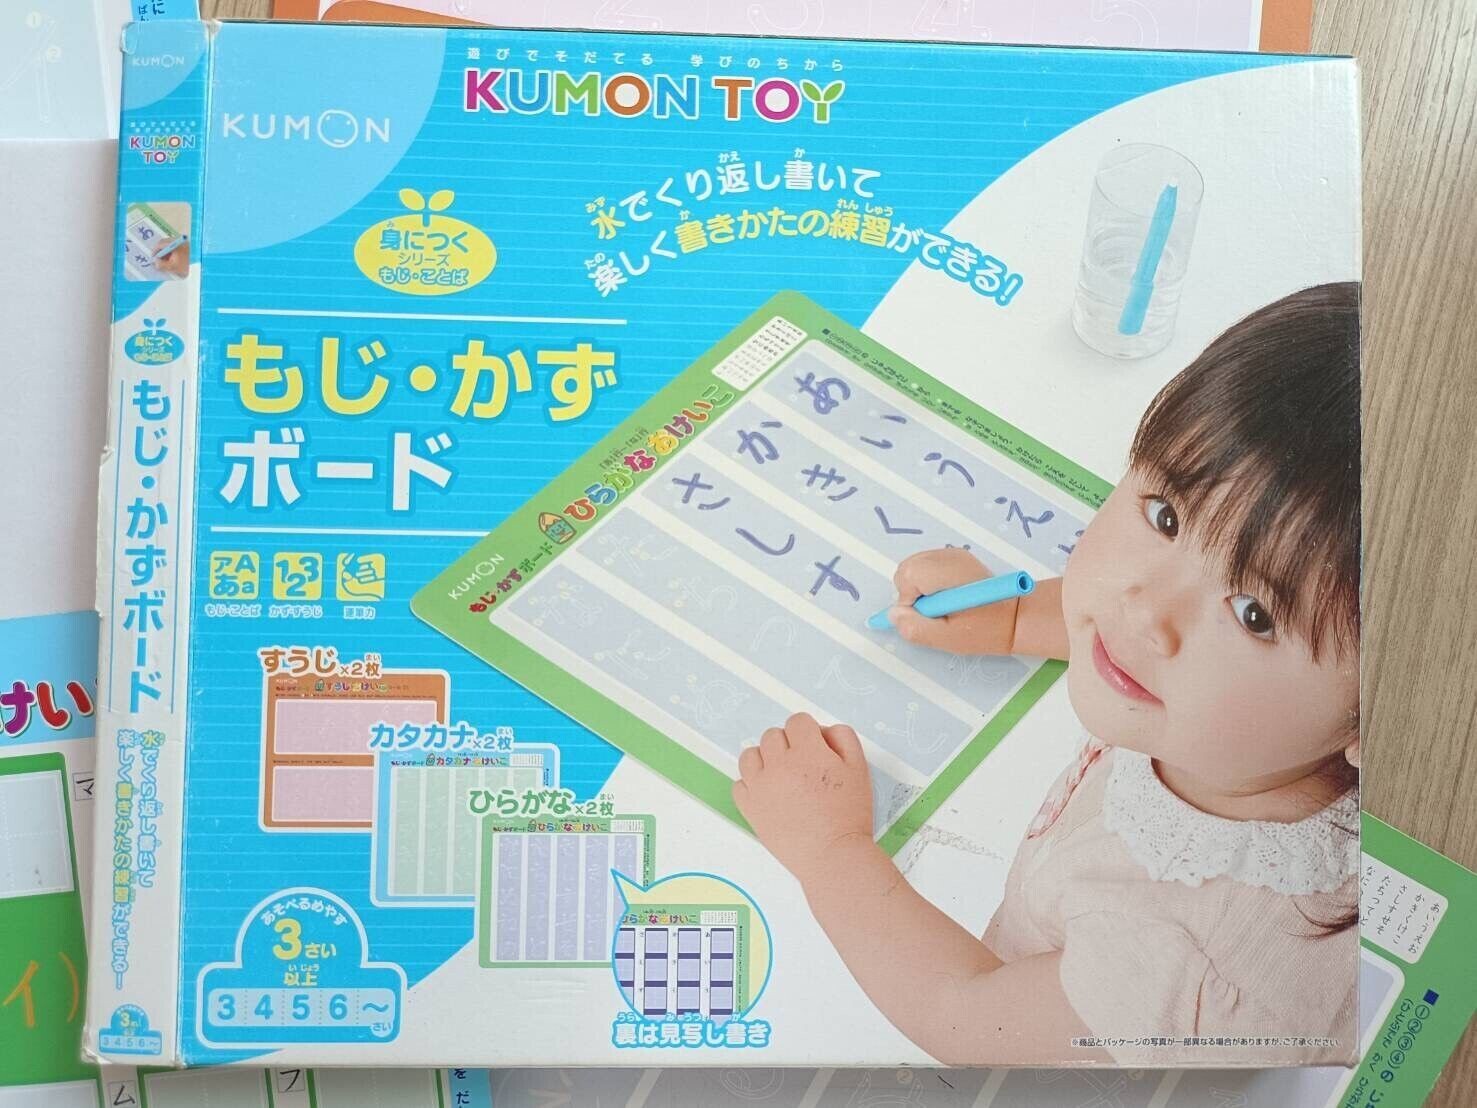 Kumon Learn by put water & learn to write "moji" and "suji" on mysterious board